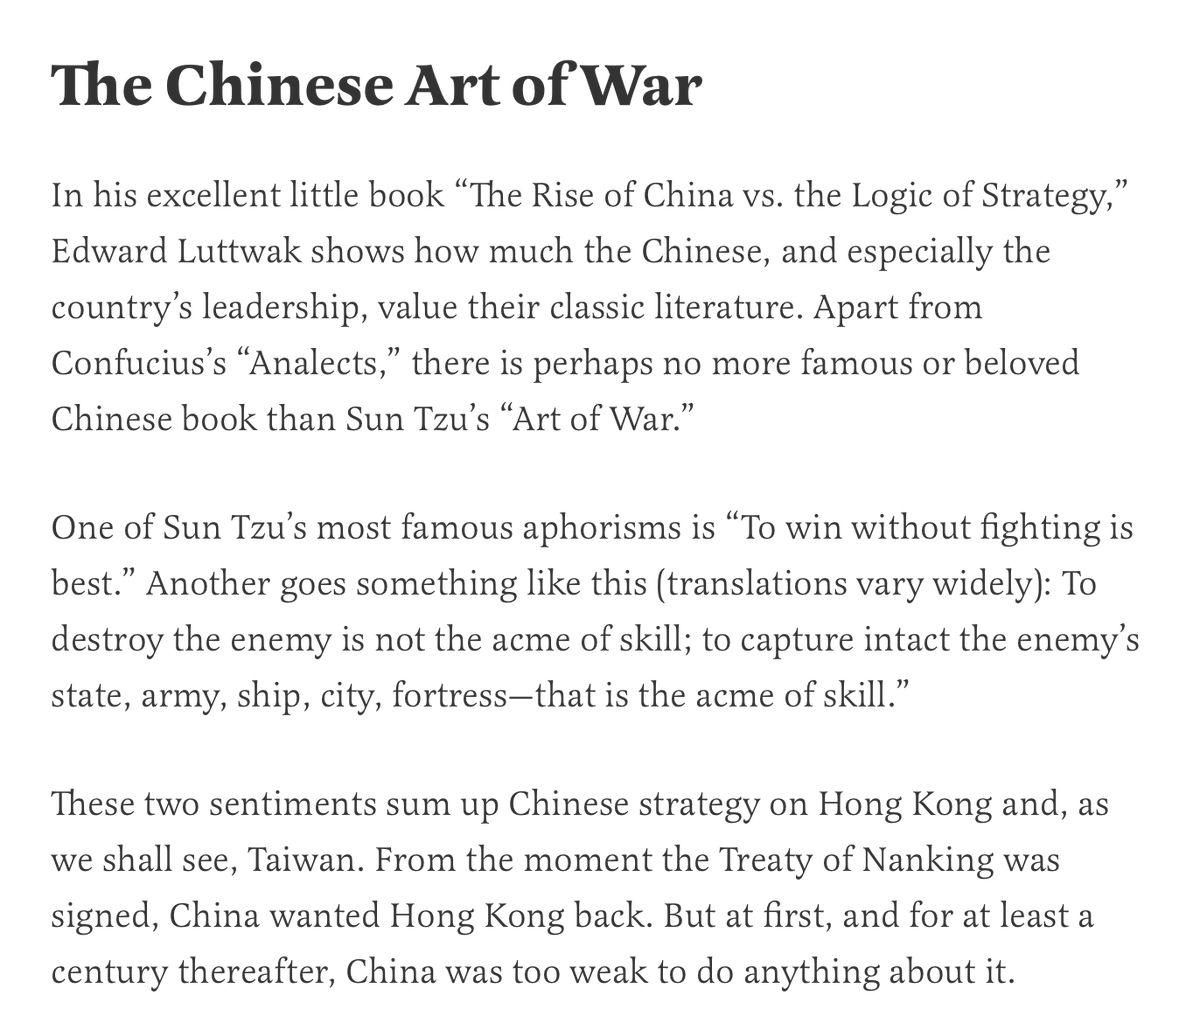 First up: an opening to the military analysis that goes straight to Sun Tzu & winning without fighting, said to sum up "Chinese strategy on Hong Kong and, as we shall see, Taiwan." To cast it so is a red flag to me that we're about to see analysis from a...visitor to the topic.